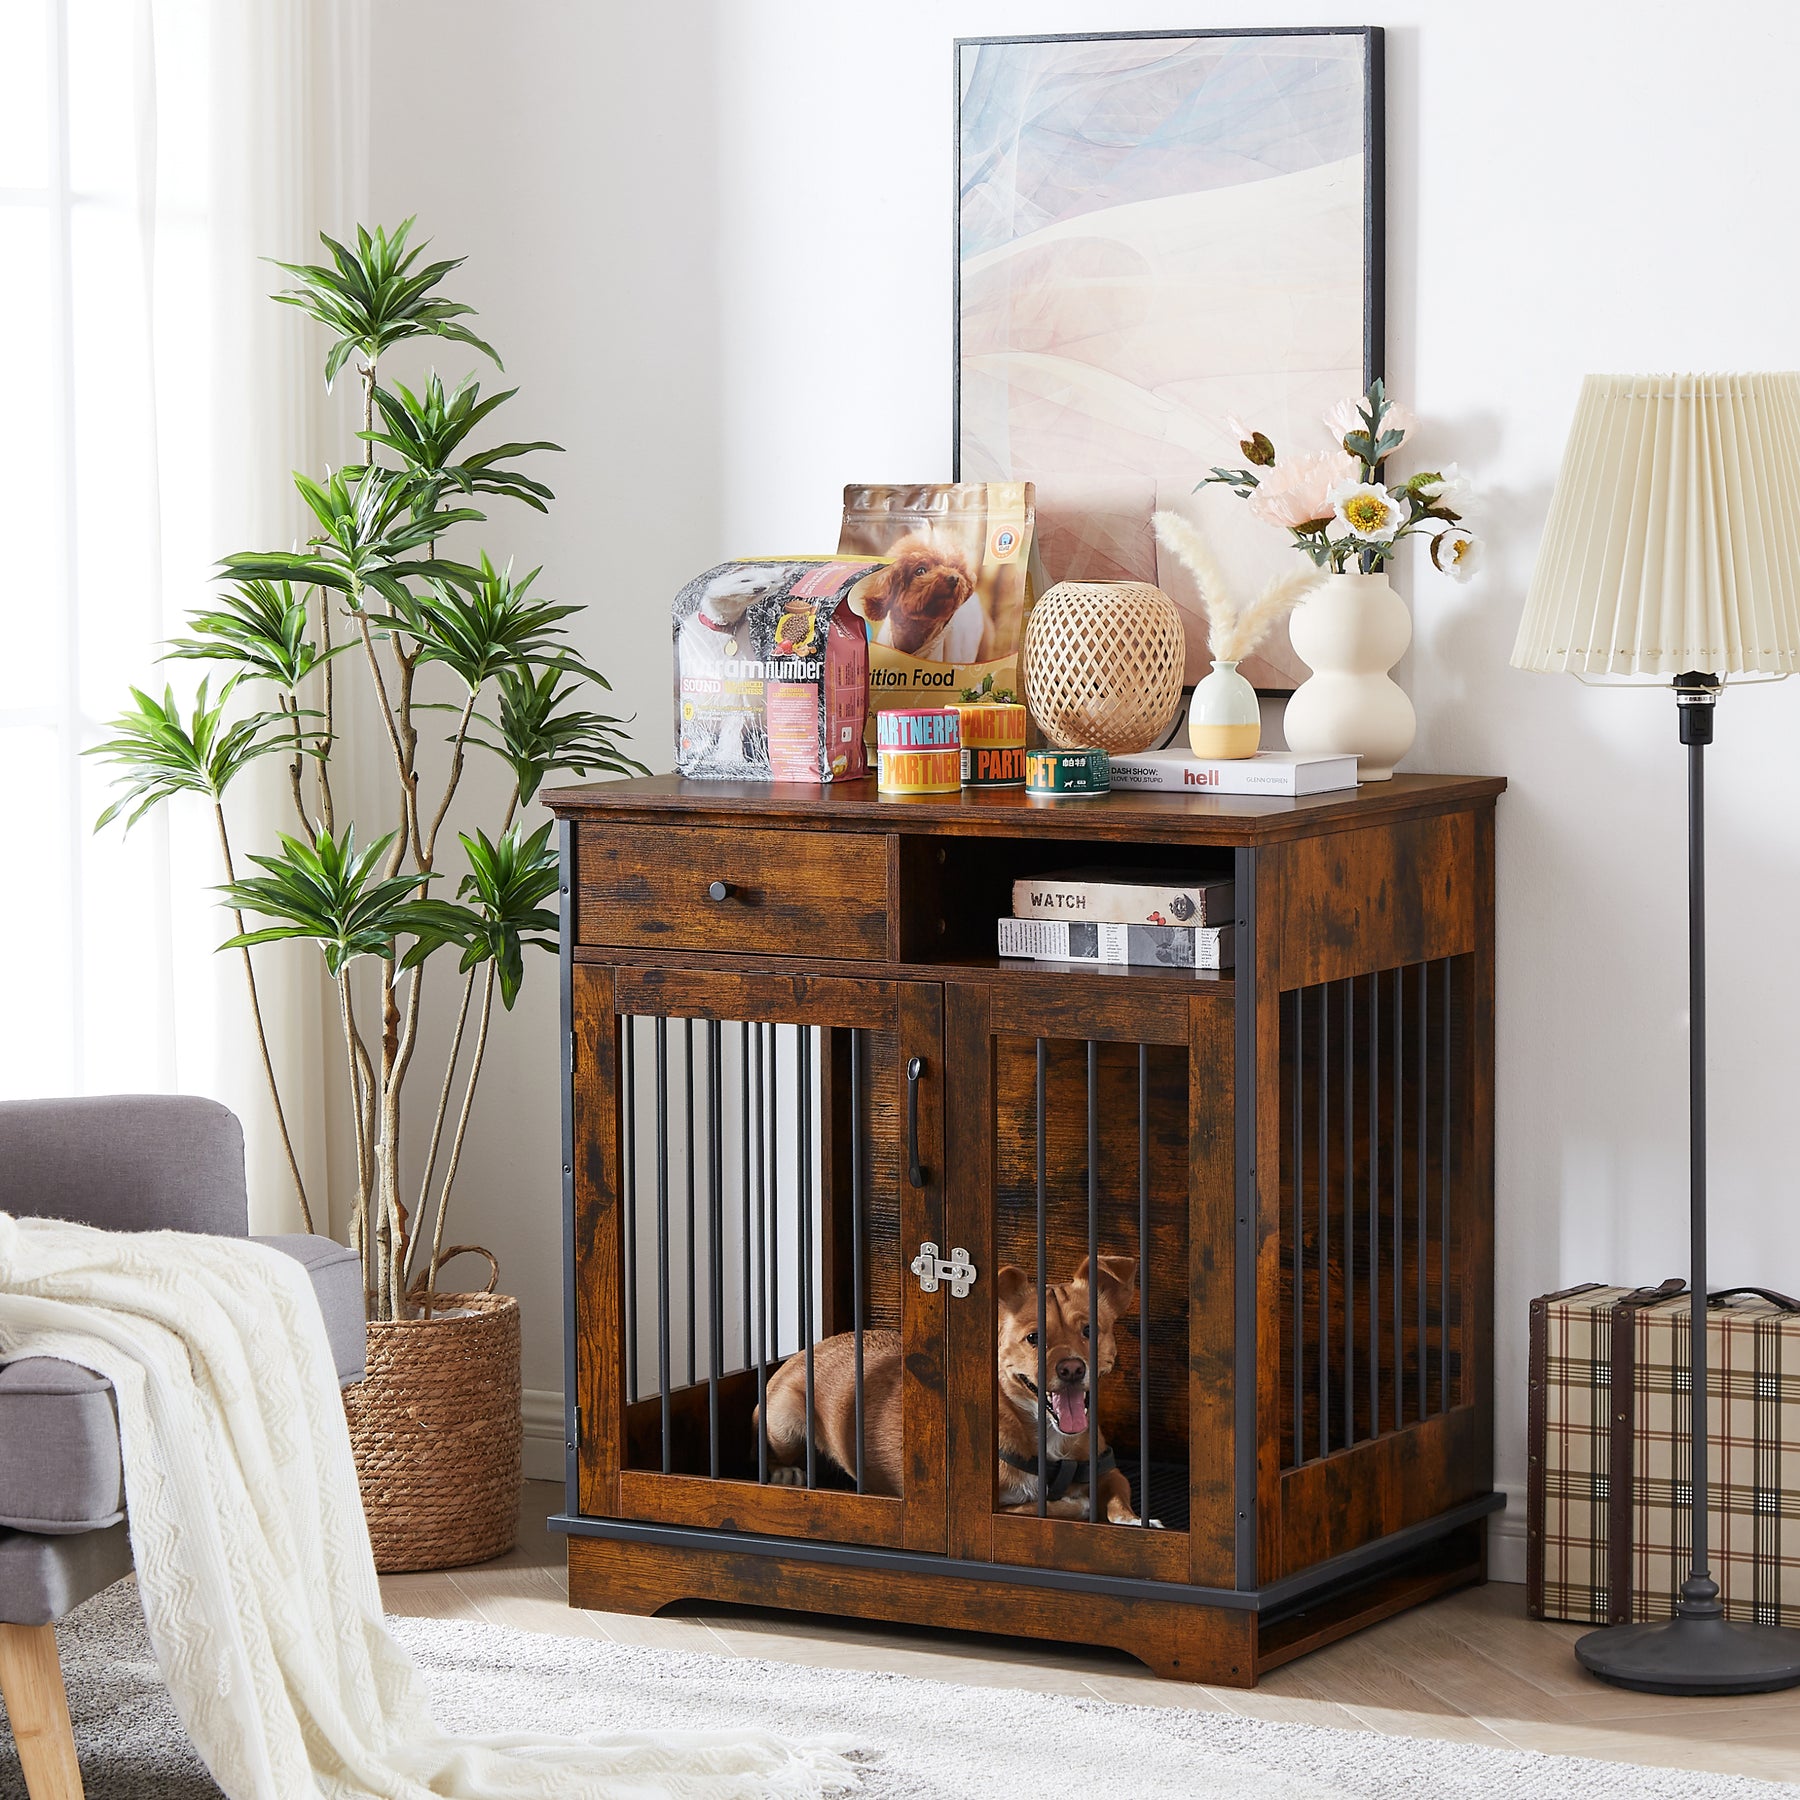 Furniture Dog crate, indoor pet crate end tables, decorative wooden kennels with removable trays. Rustic Brown, 32.3'' W x 22.8'' D x 33.5'' H. - Tonkn